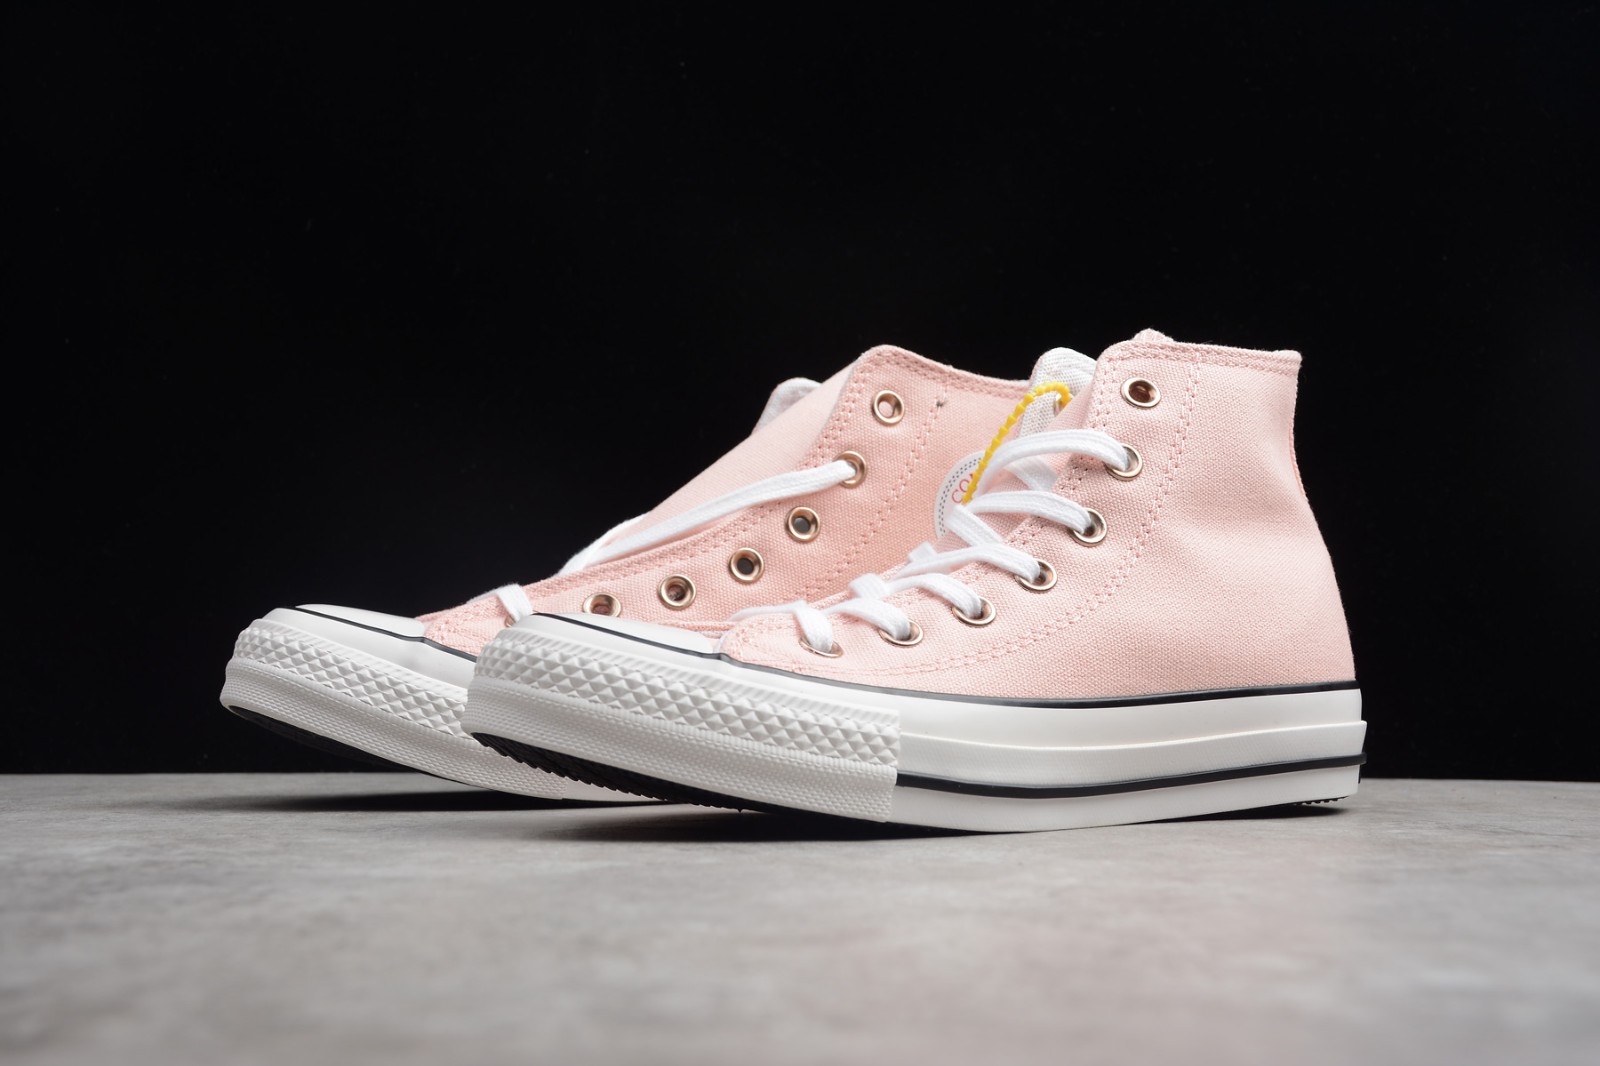 Converse All Star 100 Colors HI Pink White Black Womens Size Shoes